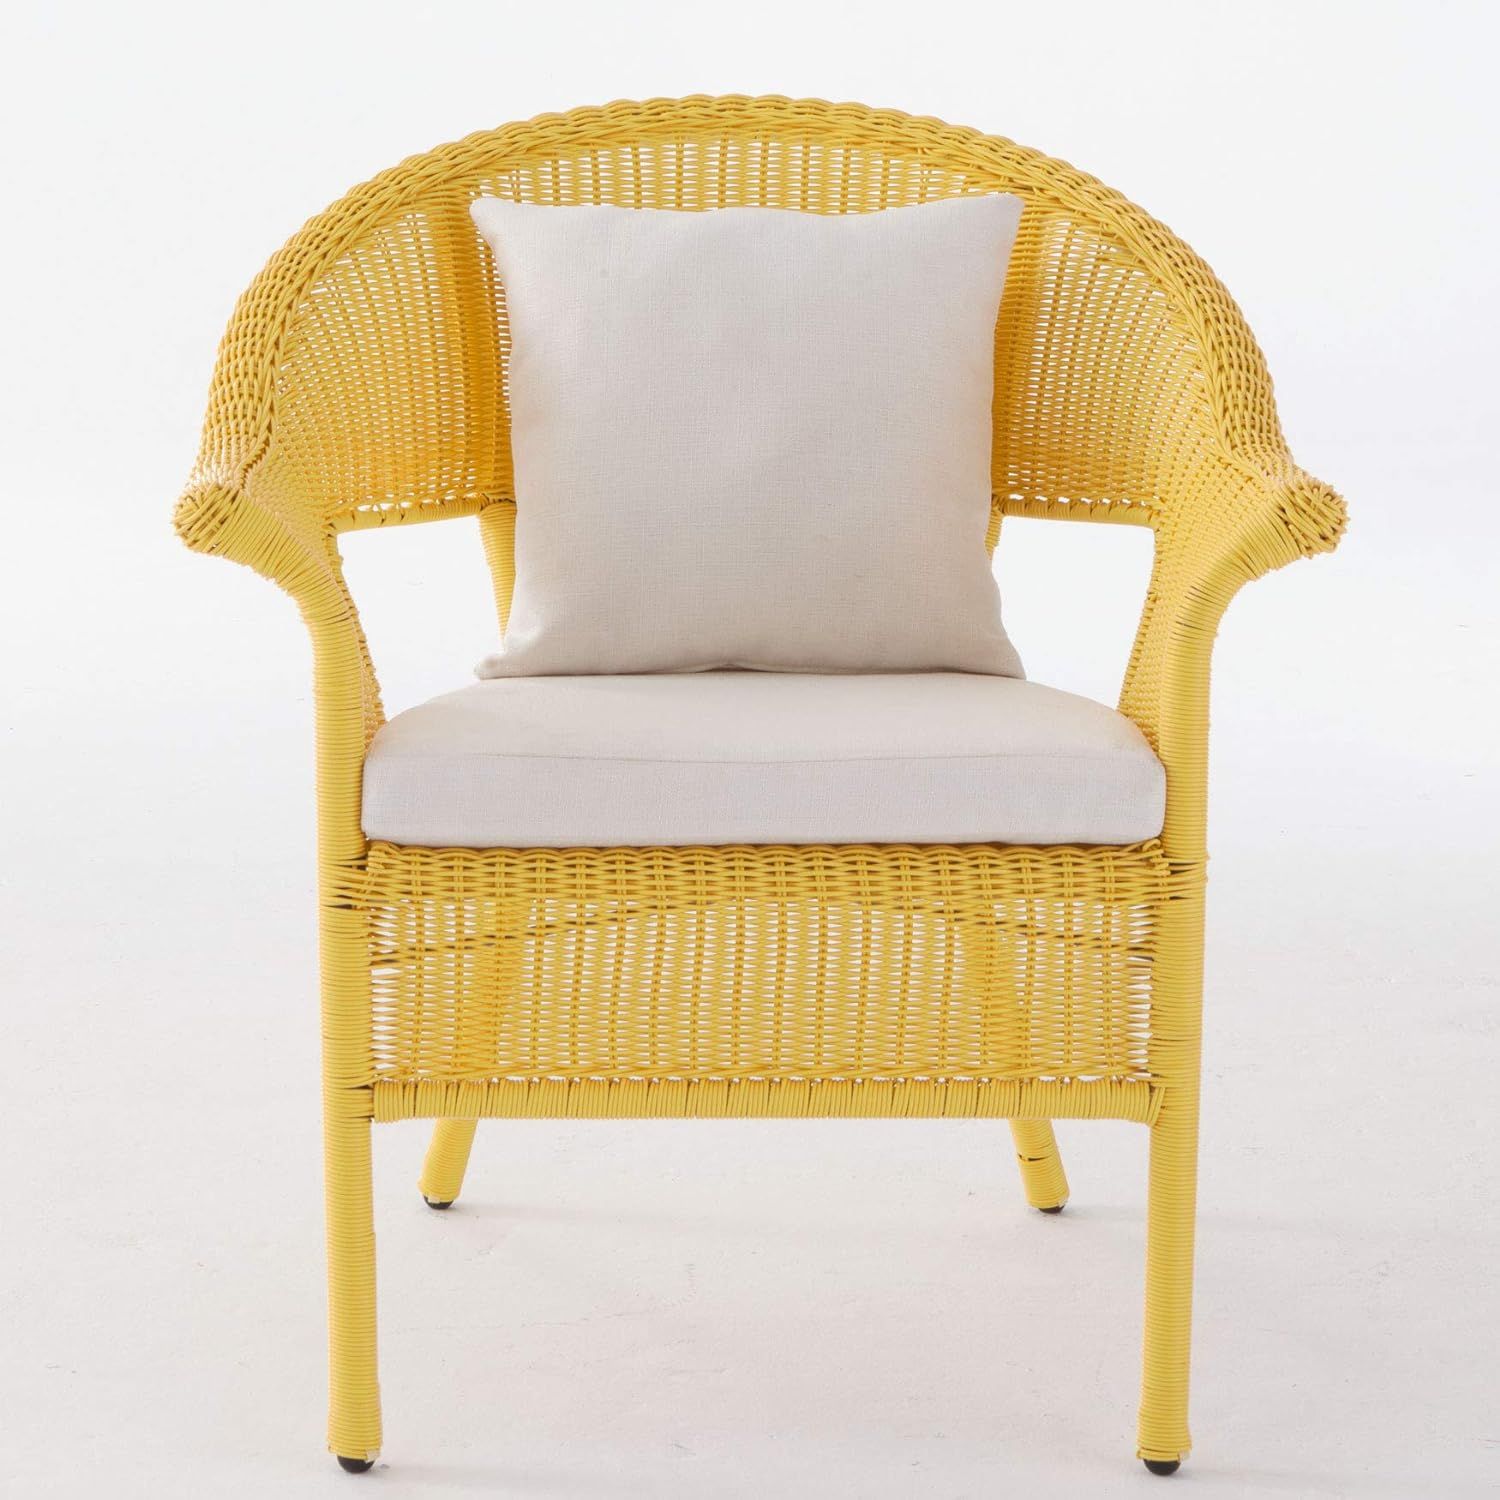 BrylaneHome Roma All-Weather Wicker Stacking Chair, Lemon | Amazon (US)